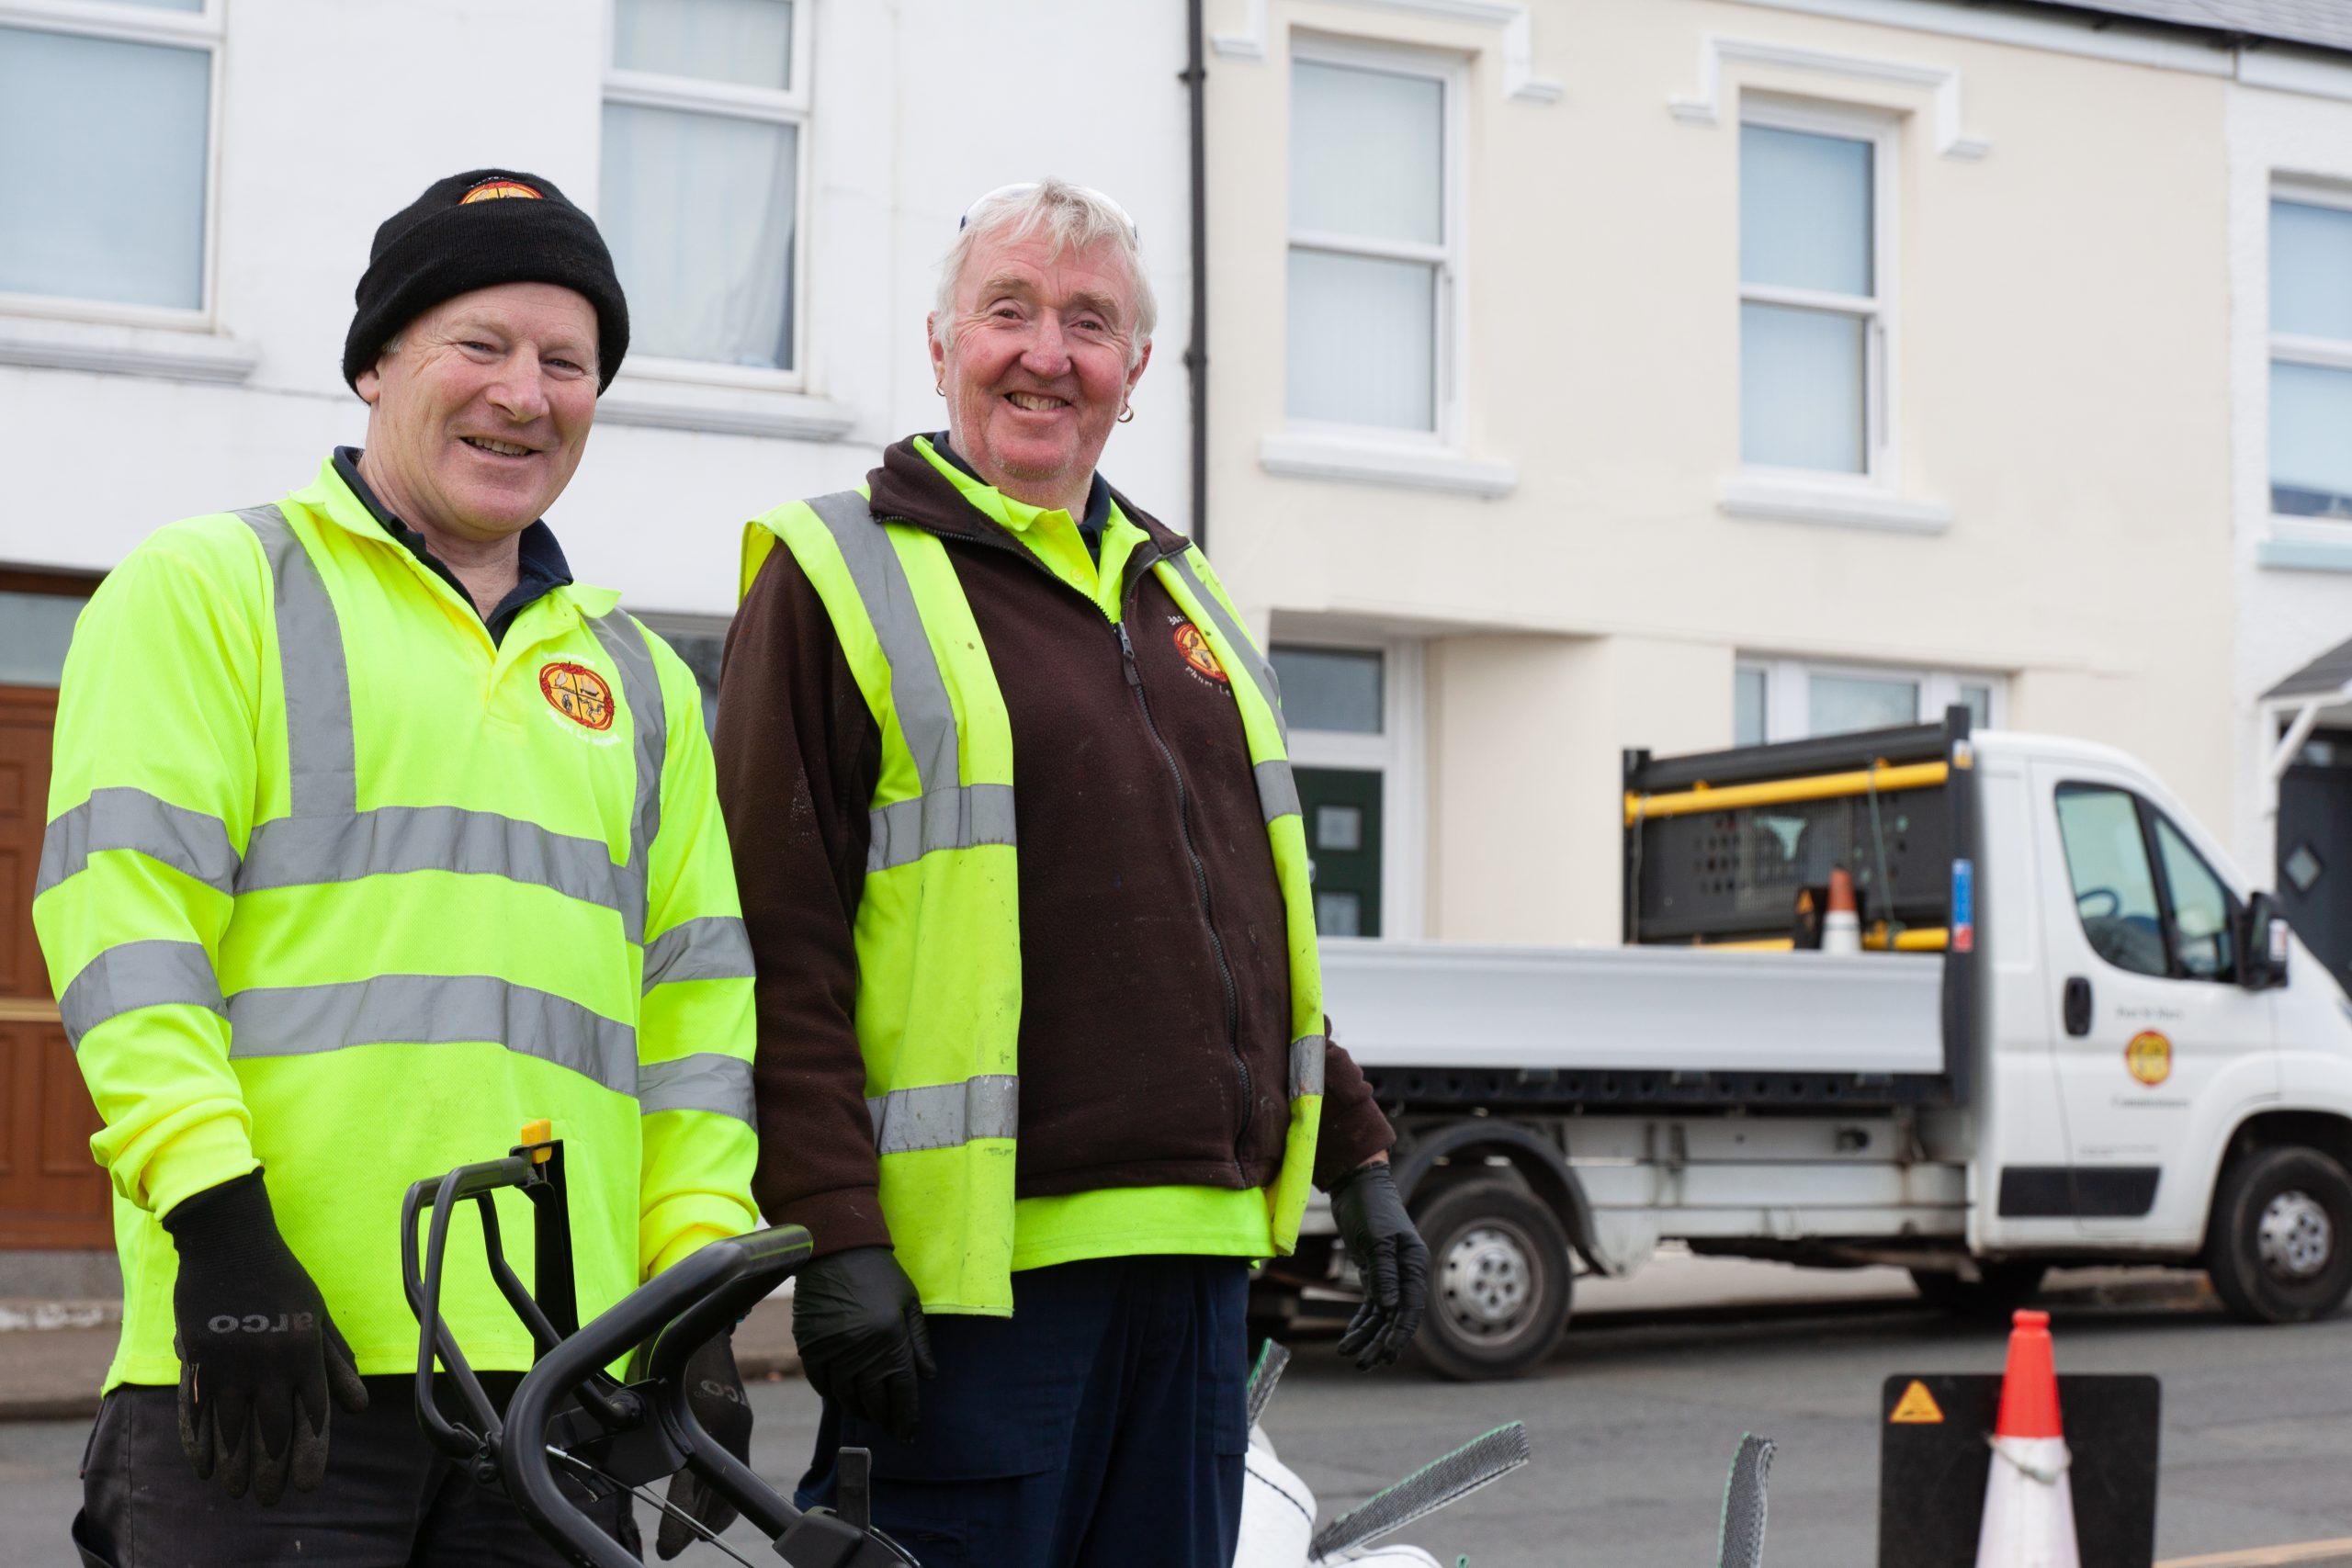 Port St Mary Commissioners - Martin Booth, Mike Kinvig